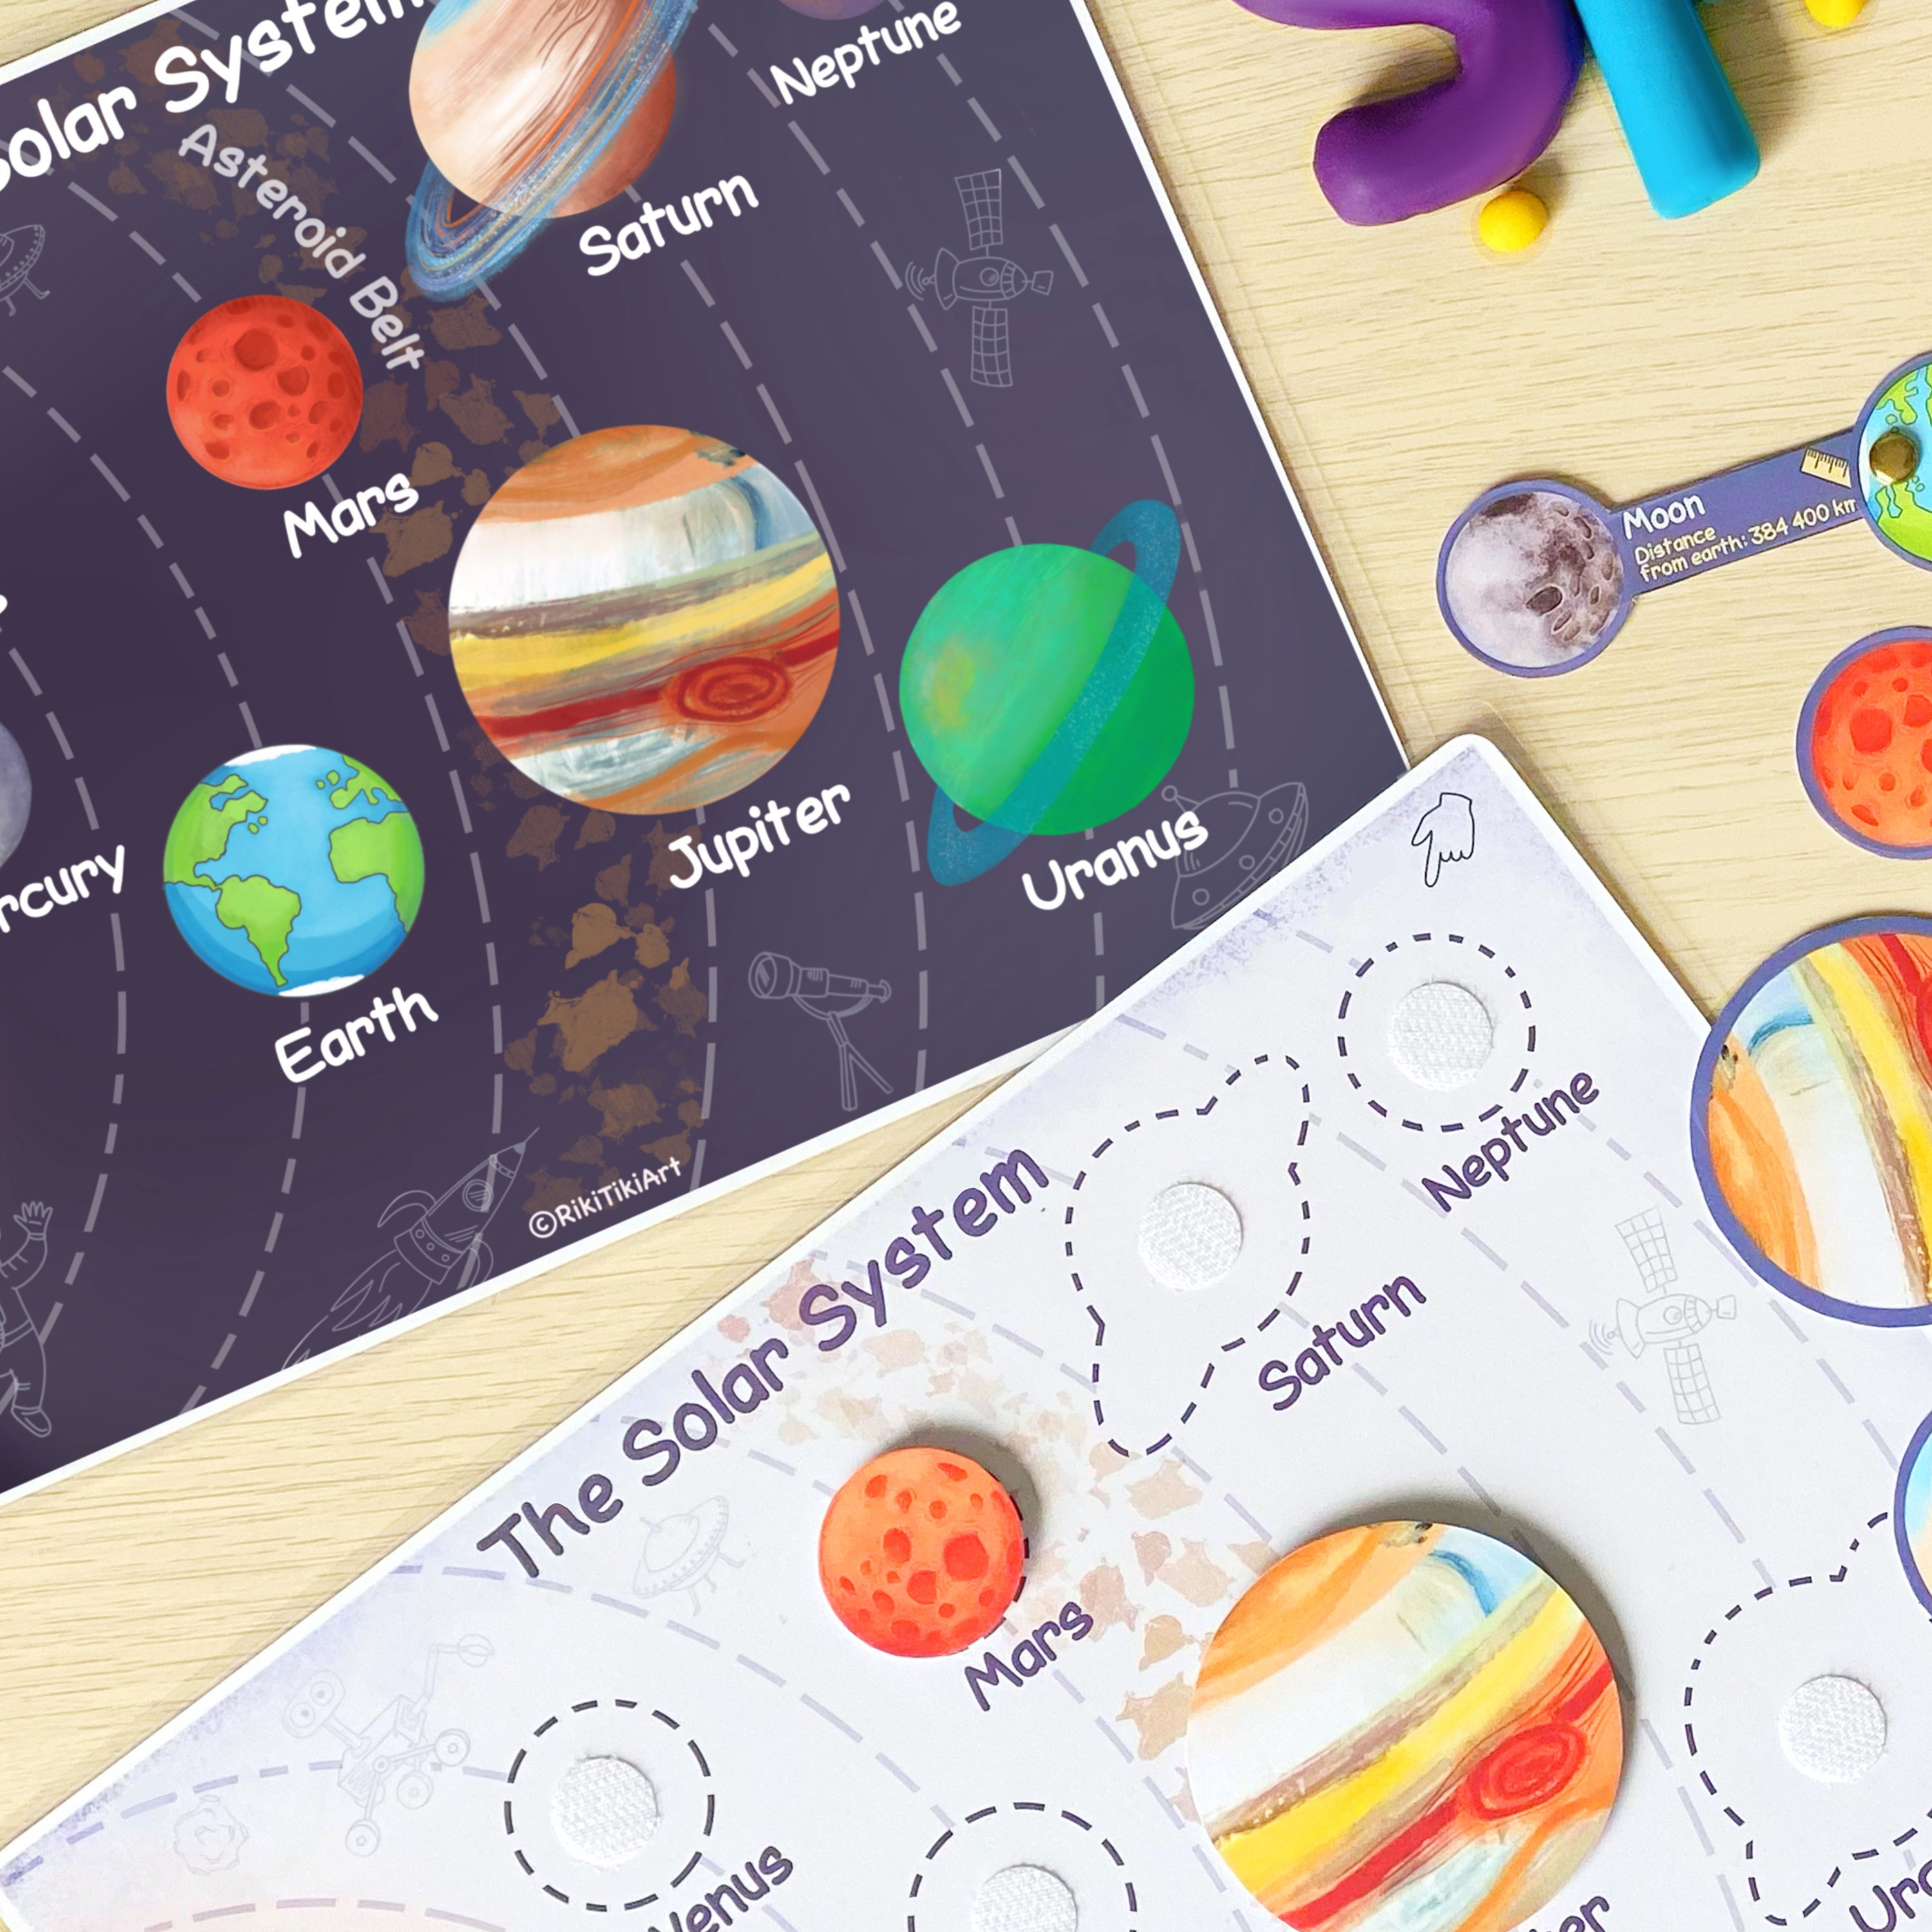 Space Sewing Kit for Kids Solar System DIY Activity – momhomedecor